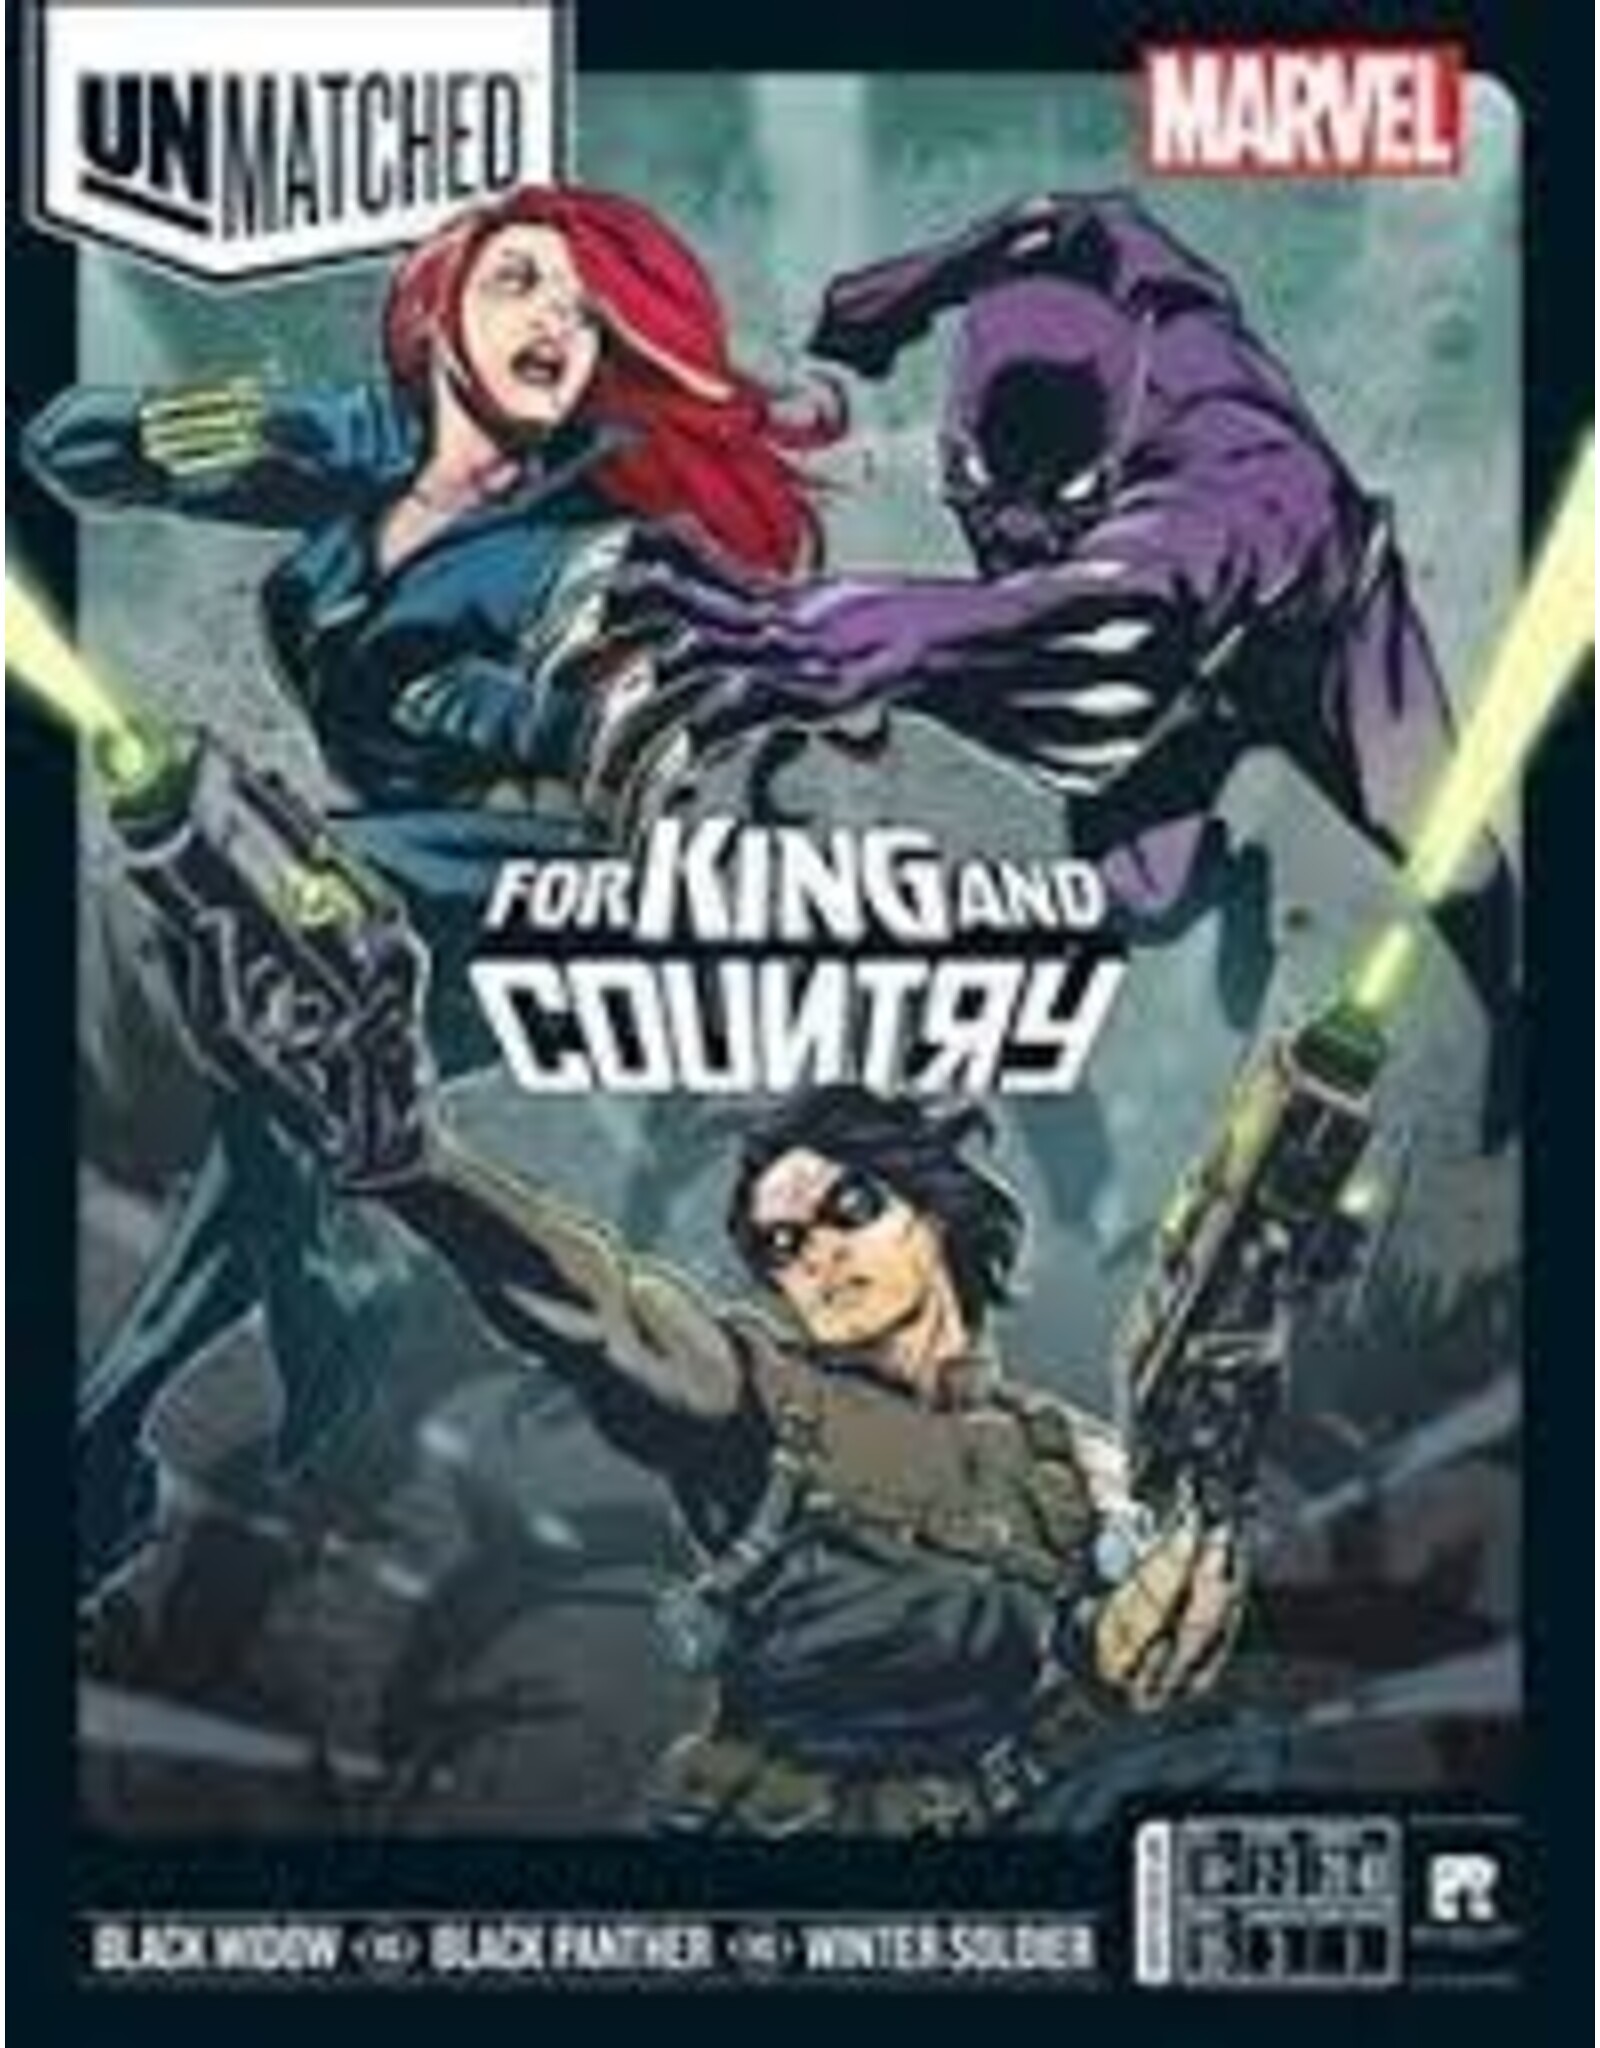 Restoration Games Unmatched Marvel: For King and Country